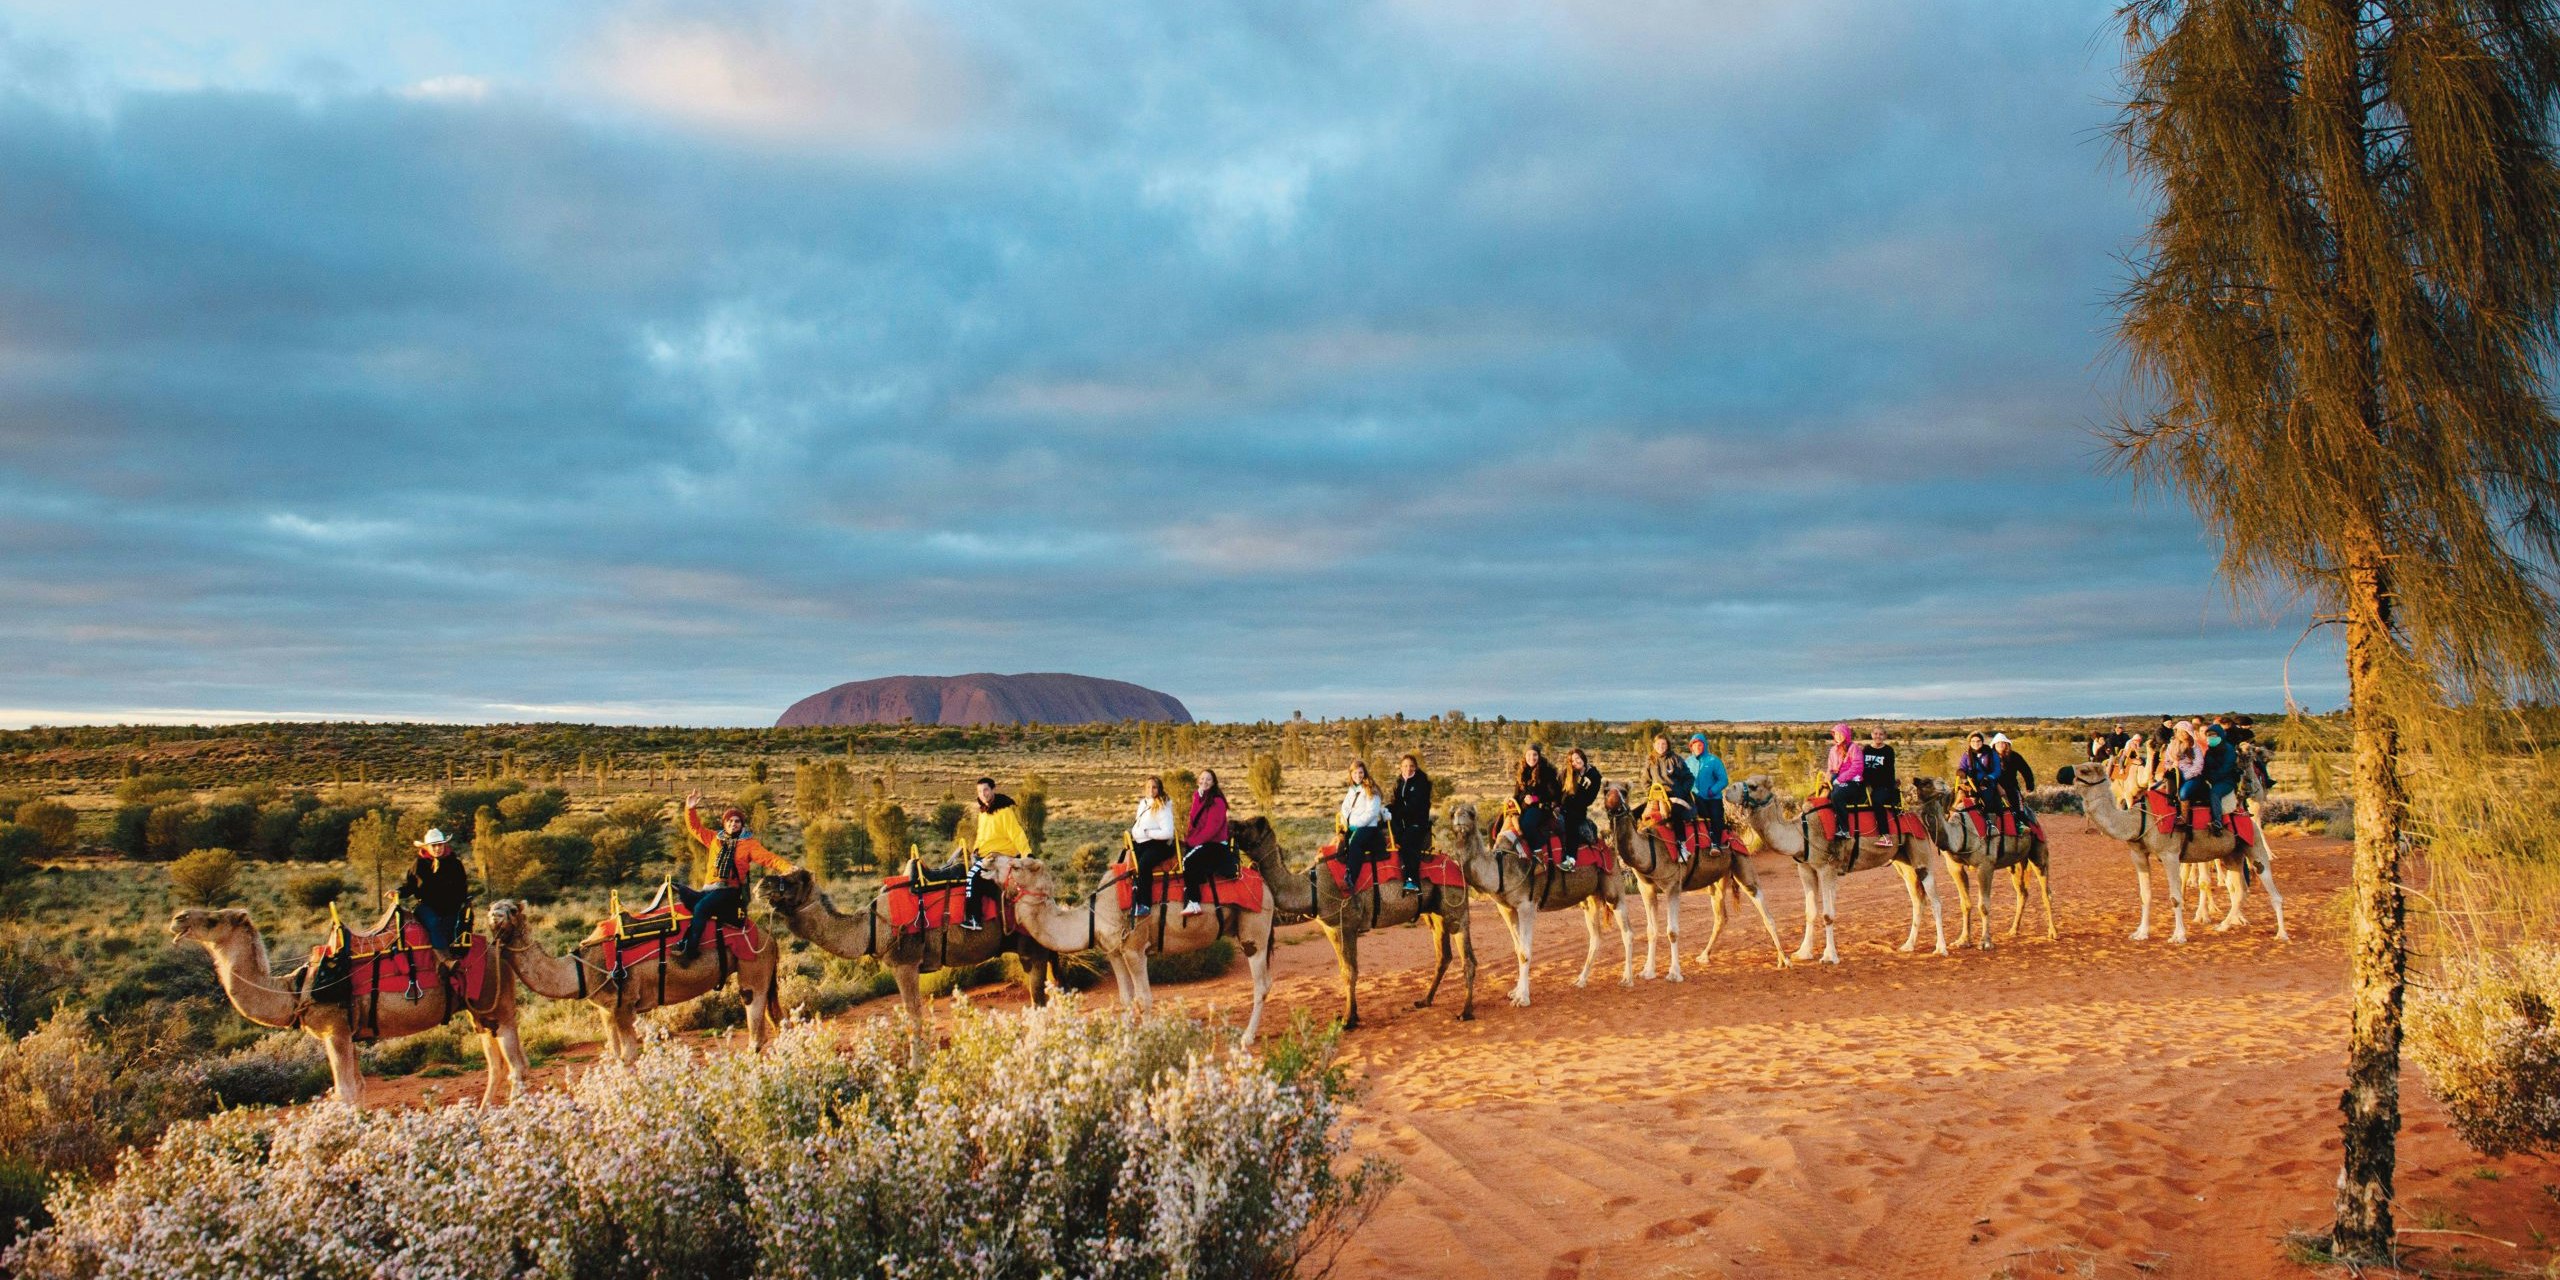 Why Are There Camels in Australia?